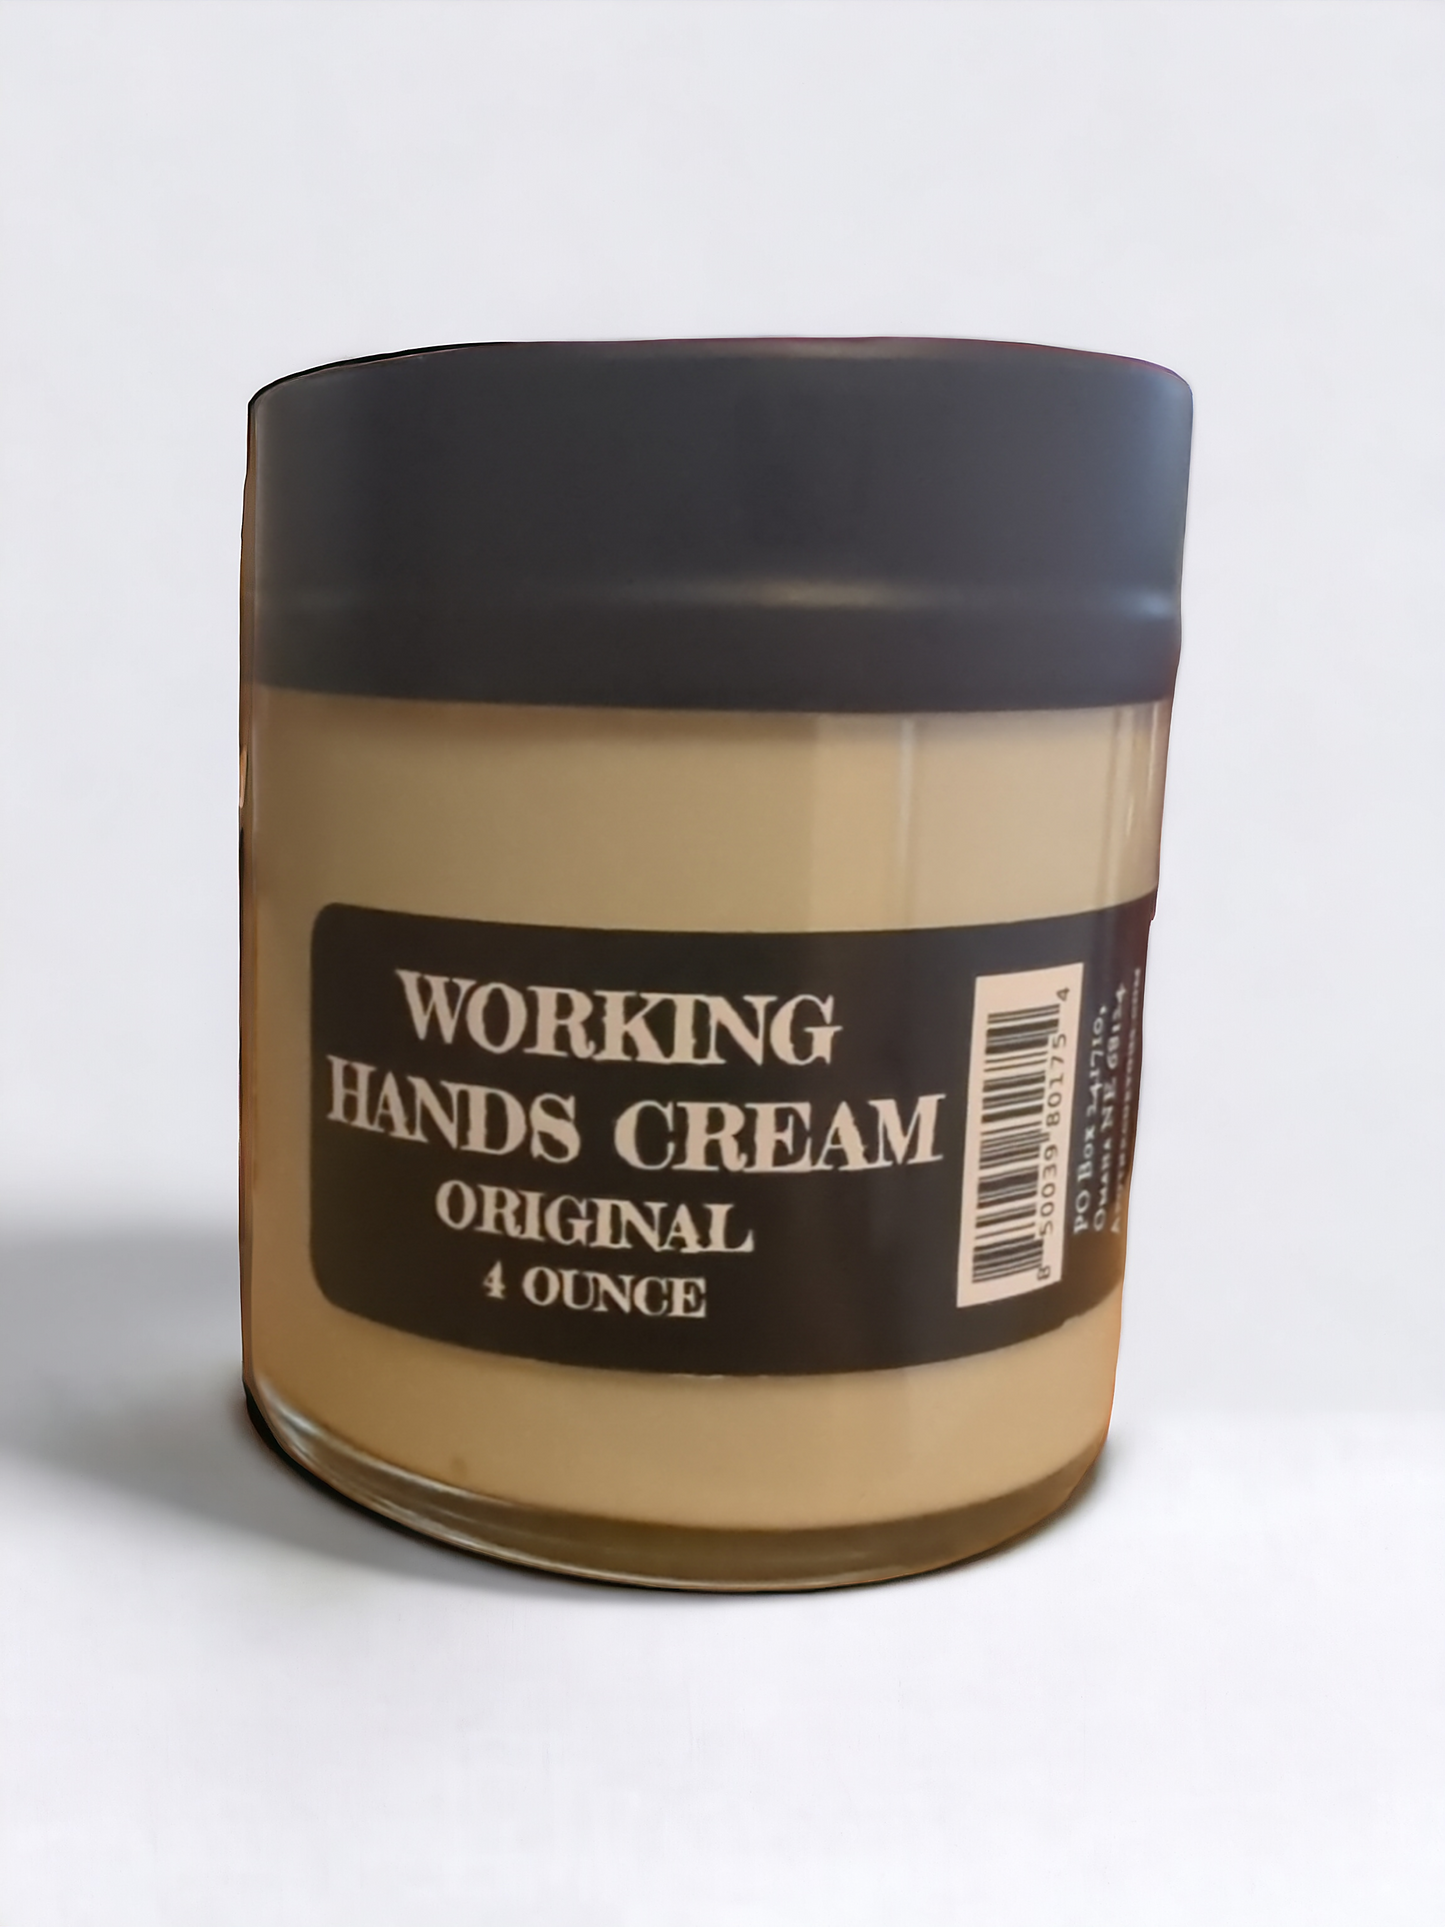 Working Hands cream, Original scent, white background, 4 ounce glass, Apothecuryous